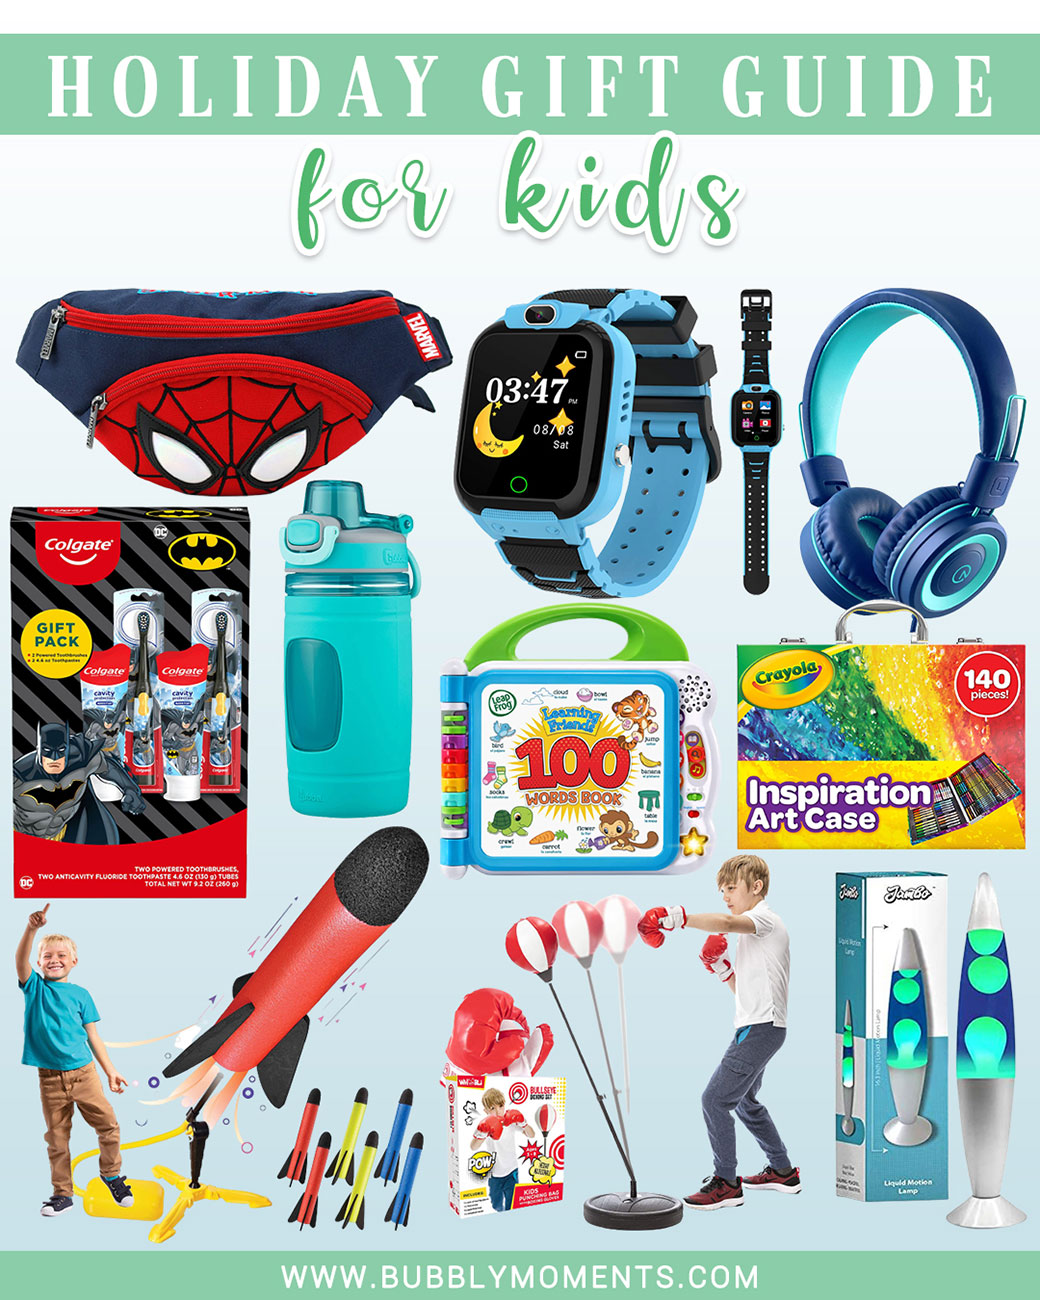 Painting Kits | Wasitpack | Learning Book for Kids | SmartW watch for kids | Headphone for kids | Coloring Set | Crayons Set | Holiday Gifts for Children | Children's toys | Children's Christmas Gift Guides | Bubbly Moments